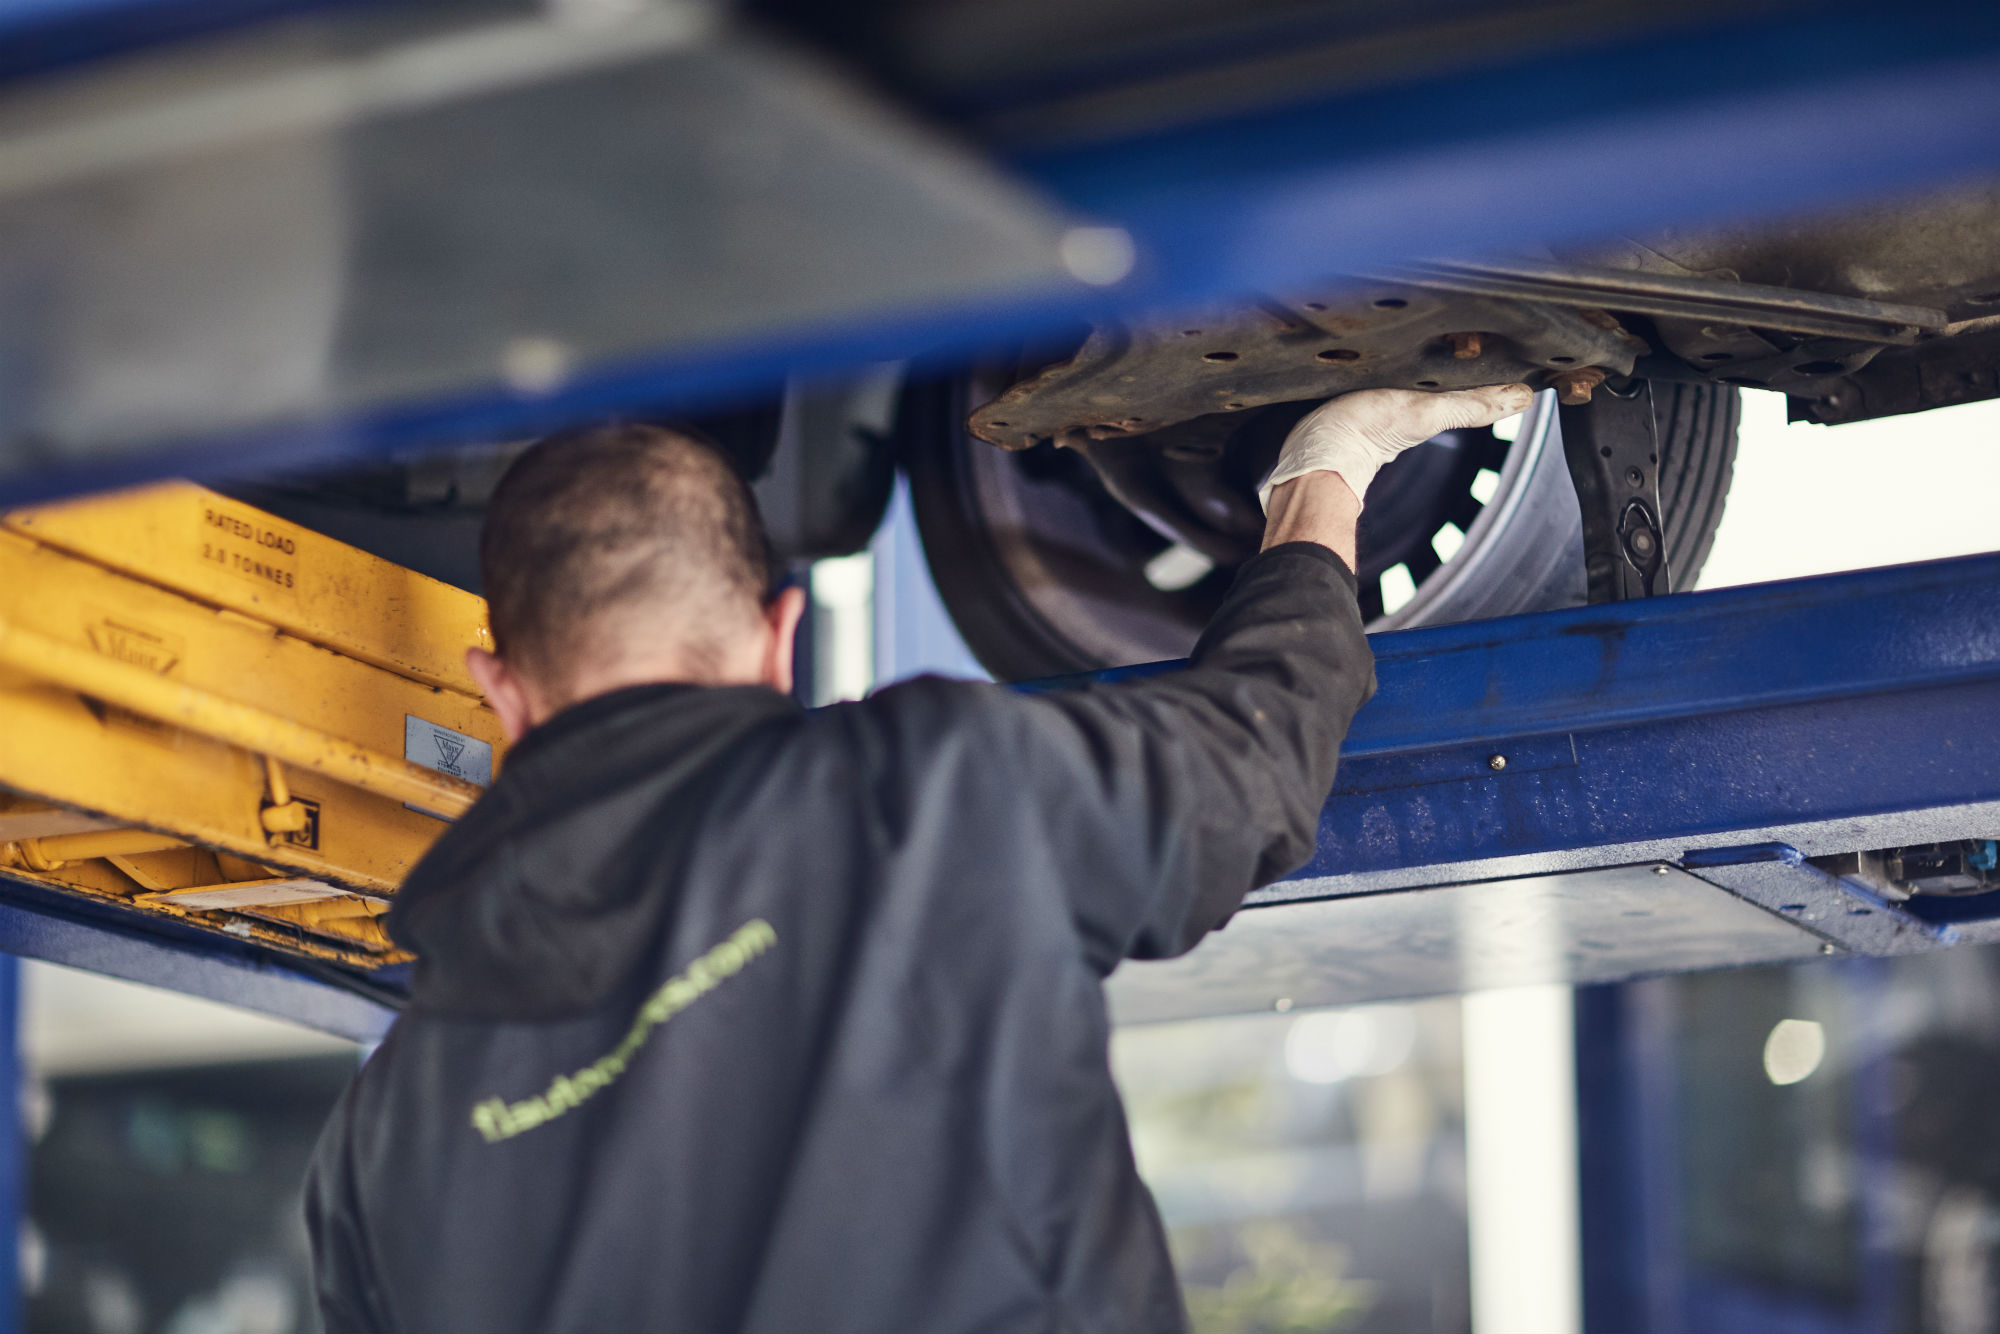 A new way to sign into the MOT testing service - Matters of Testing